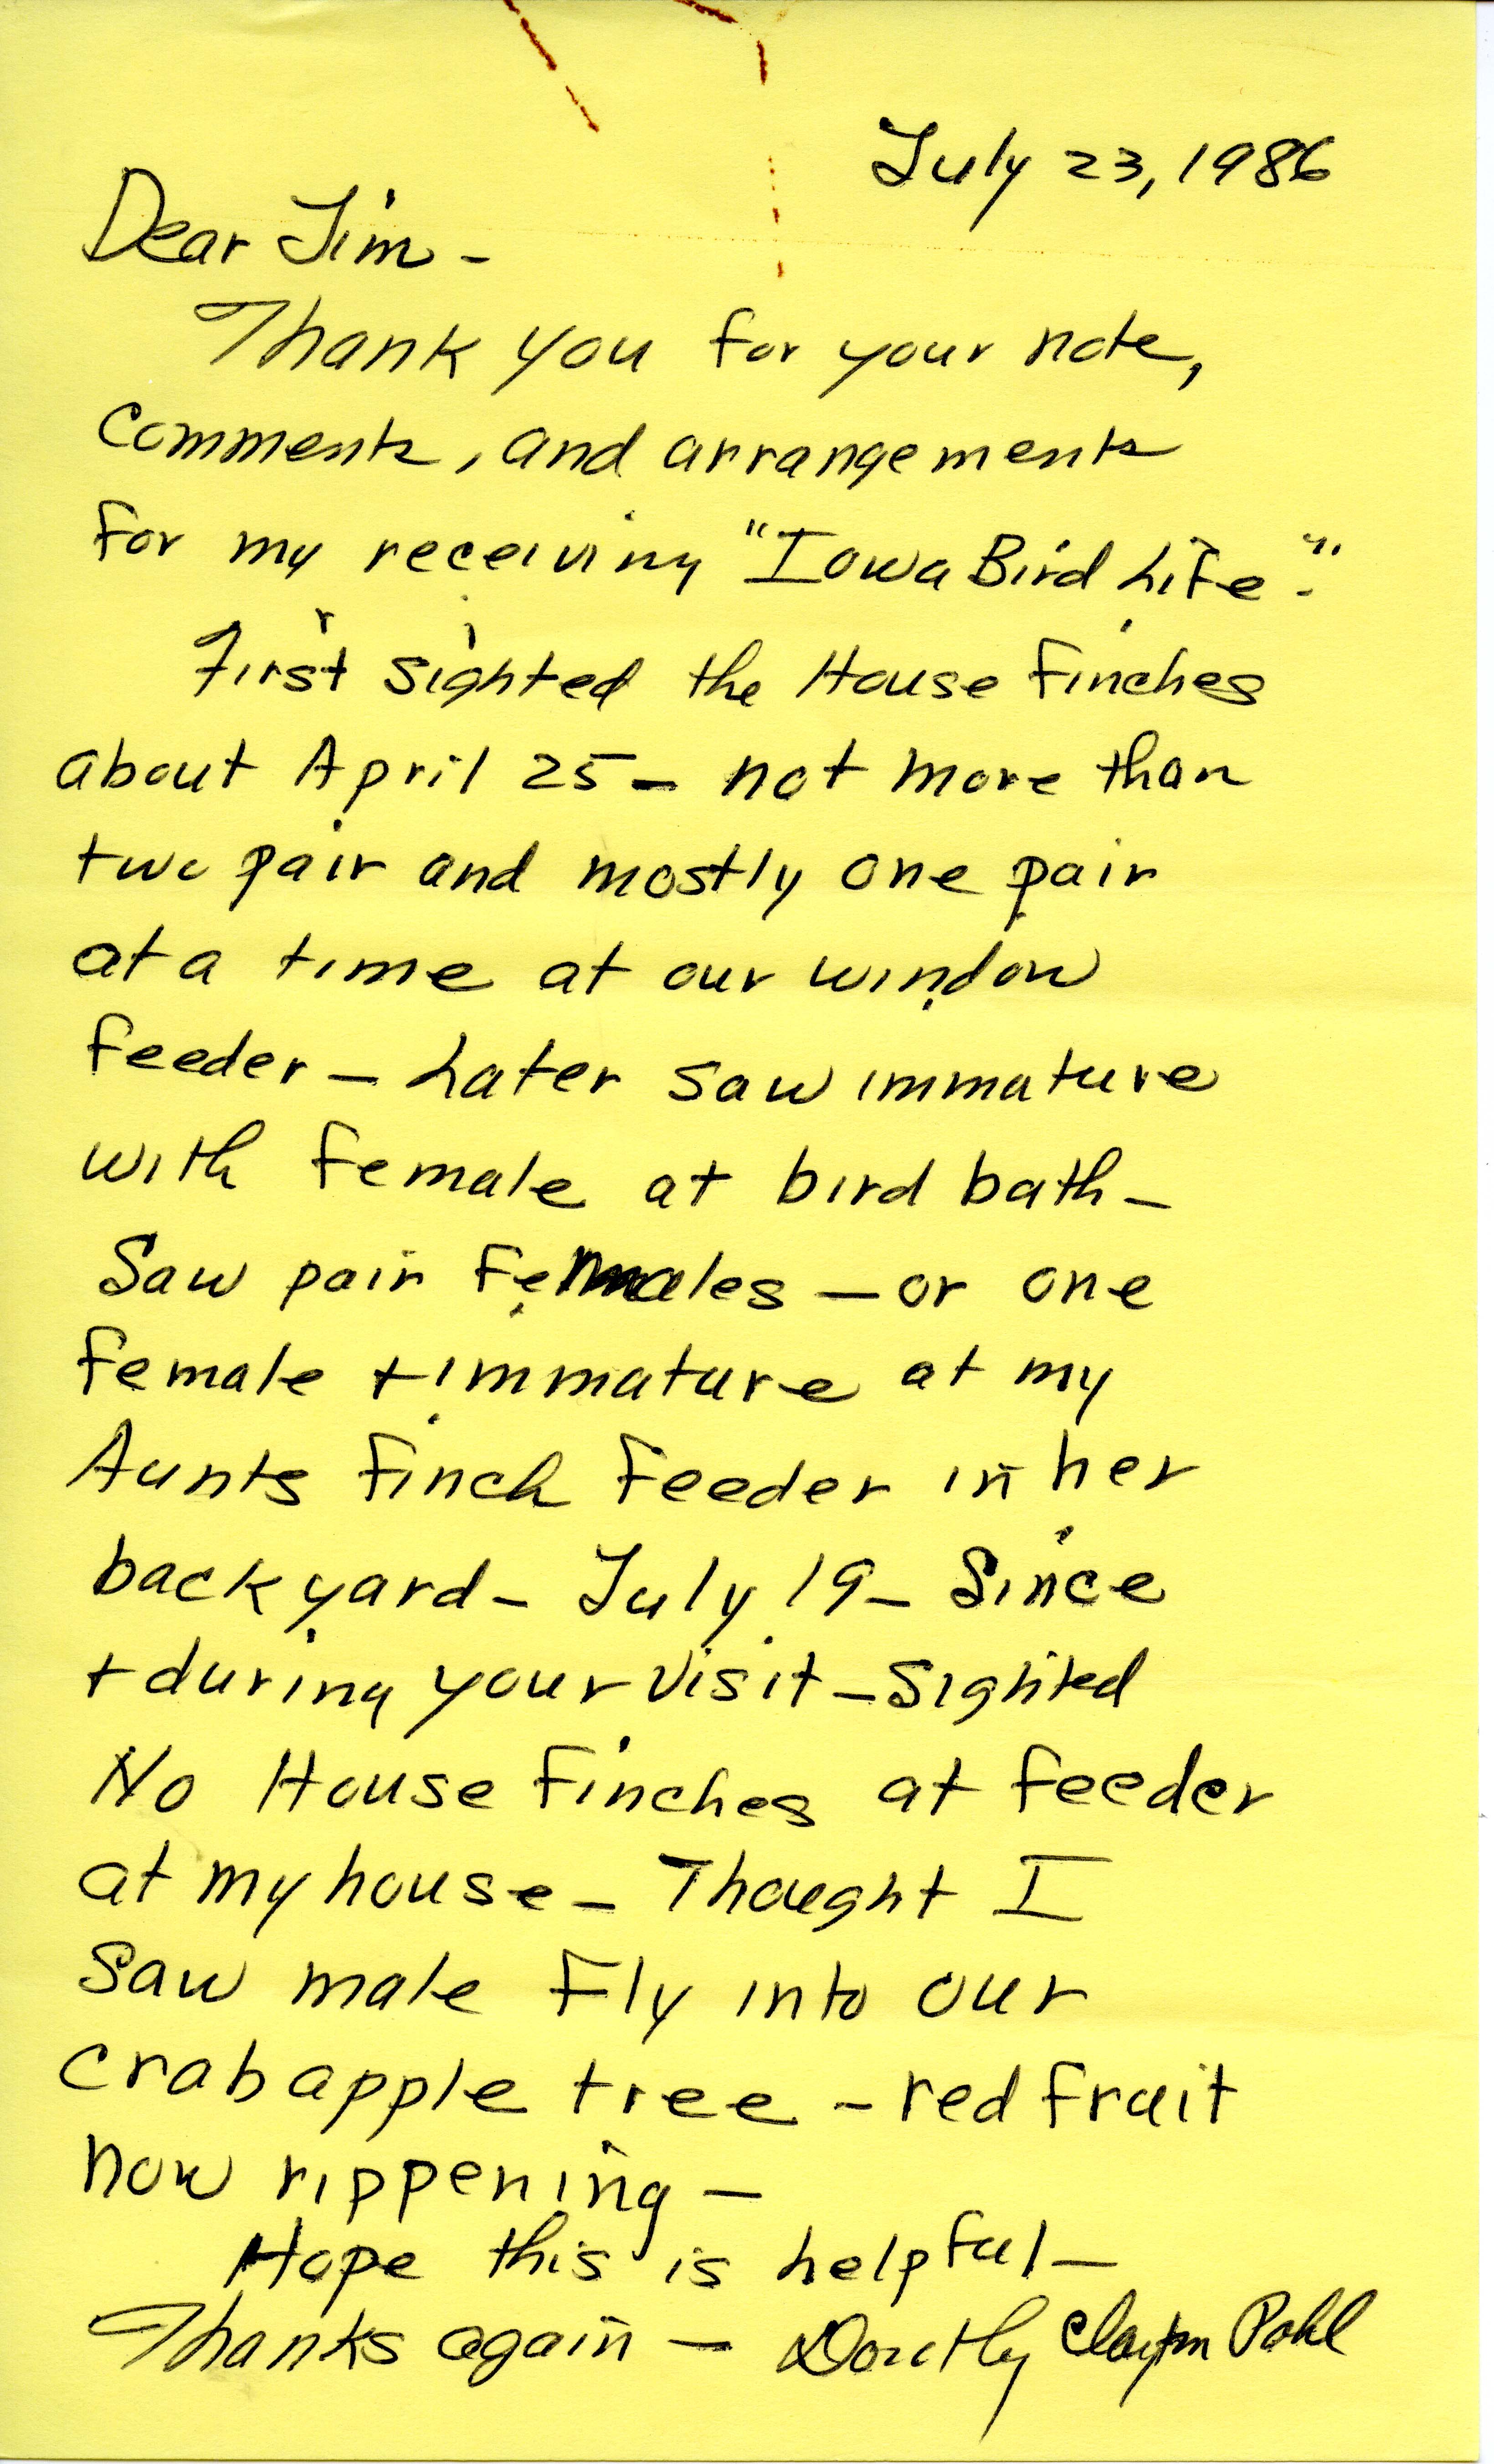 Dorothy Clayton Pohl letter regarding house finch sightings, July 23, 1986